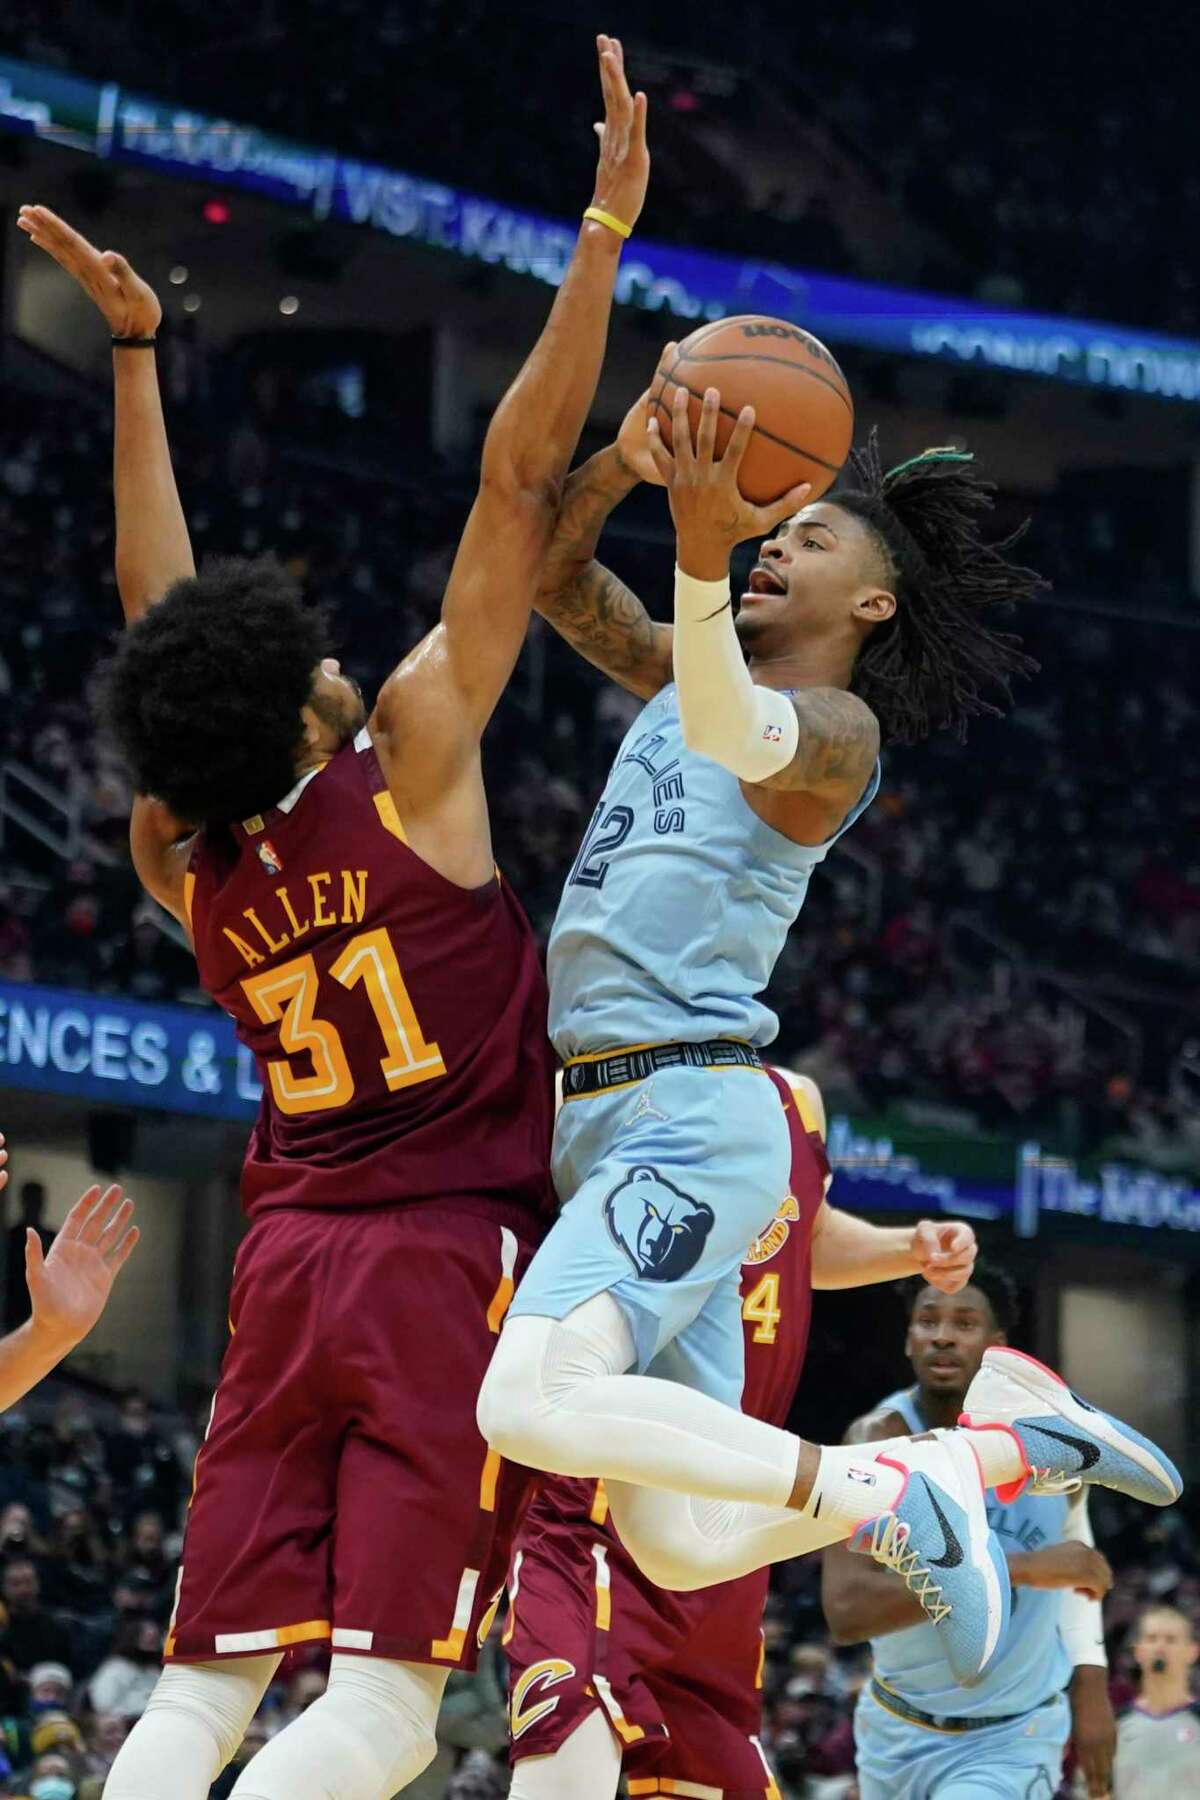 Memphis Grizzlies' Ja Morant (12) drives against Cleveland Cavaliers' Jarrett Allen (31) in the first half of an NBA basketball game, Tuesday, Jan. 4, 2022, in Cleveland. (AP Photo/Tony Dejak)